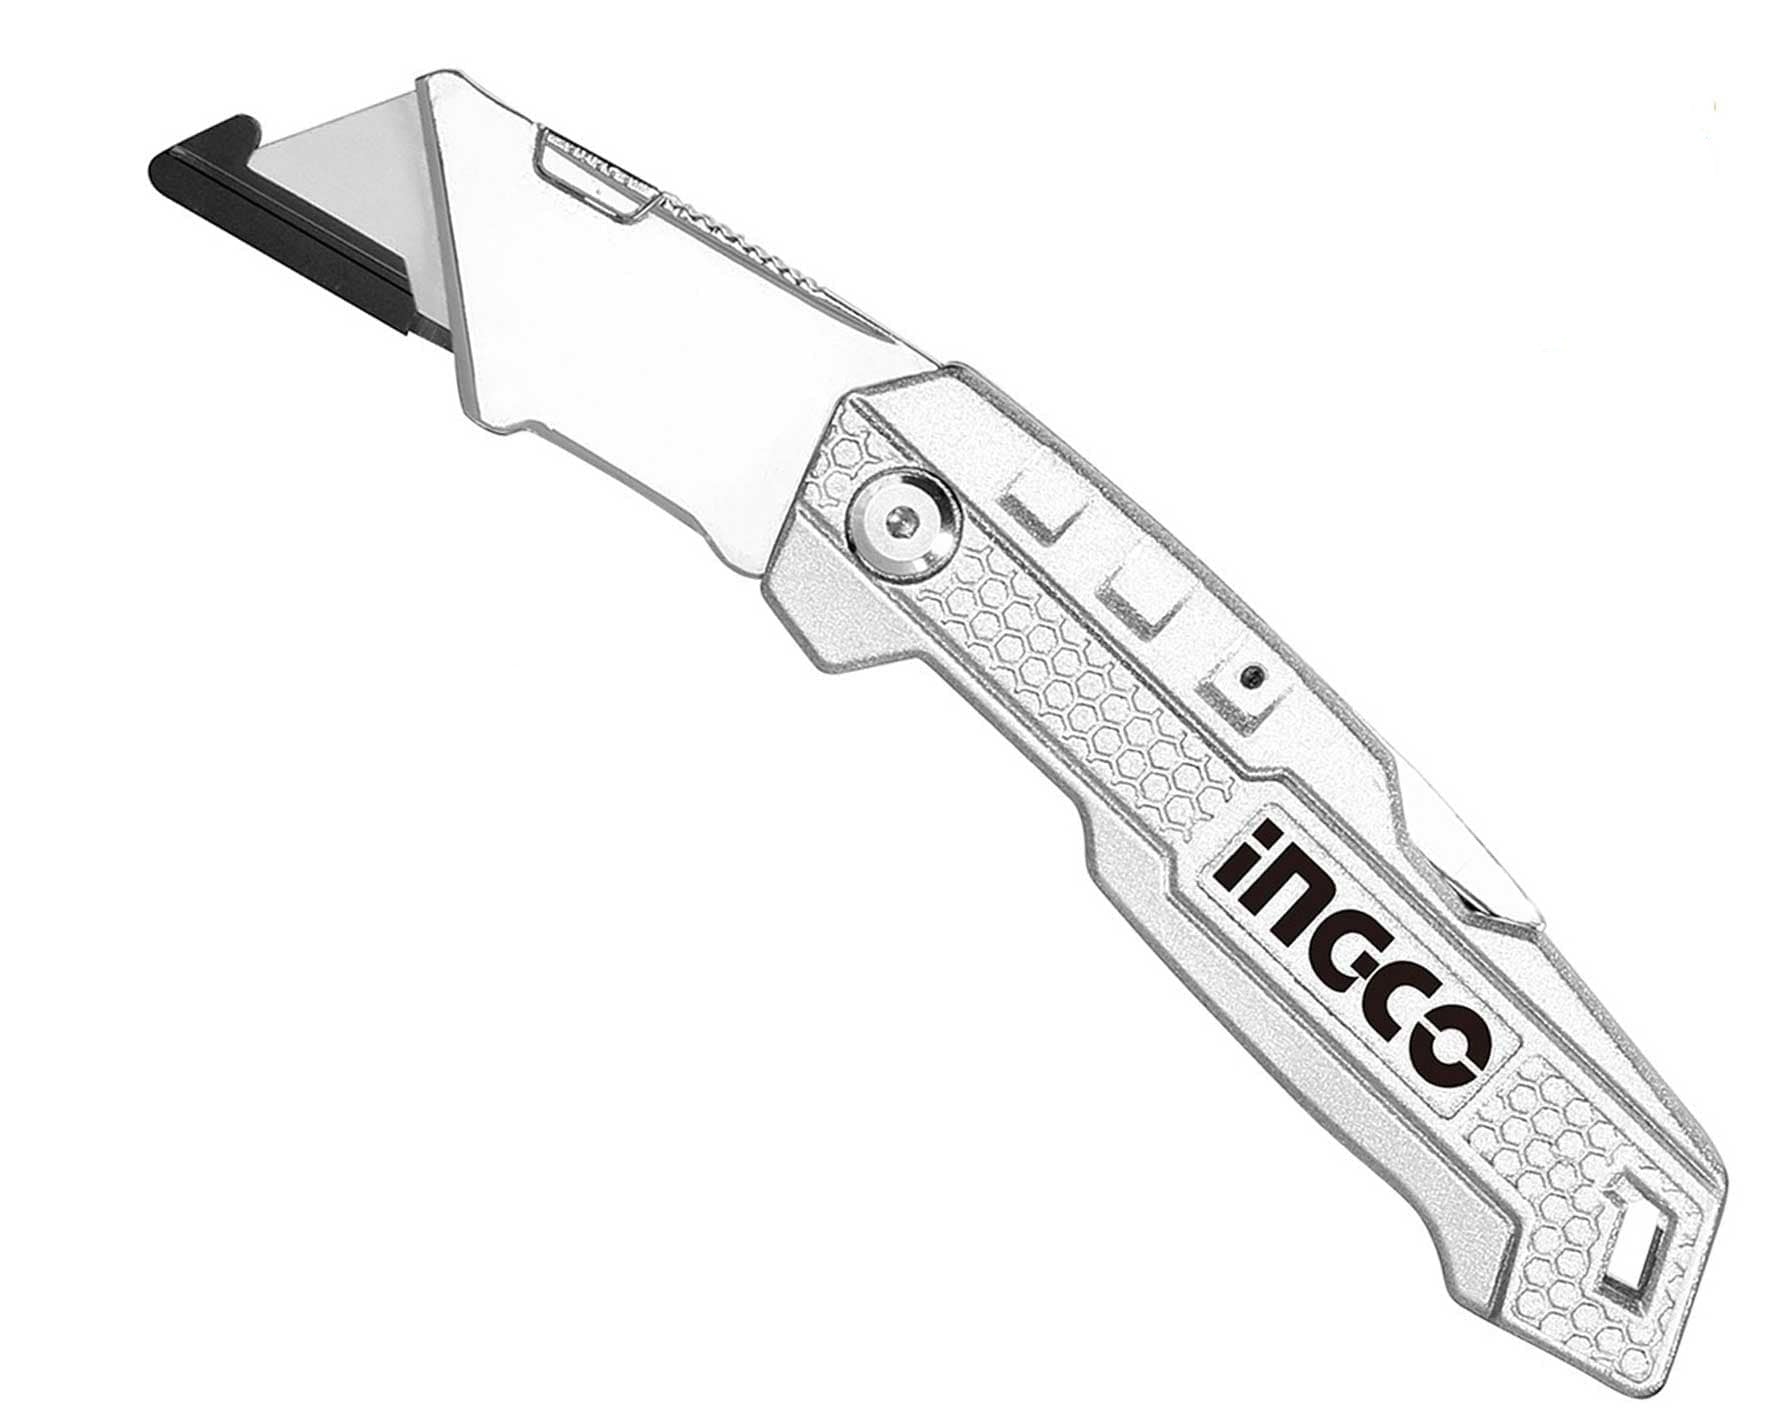 Ingco 2" Folding Knife - HFSW18028C | Supply Master Accra, Ghana Hand Saws & Cutting Tools Buy Tools hardware Building materials